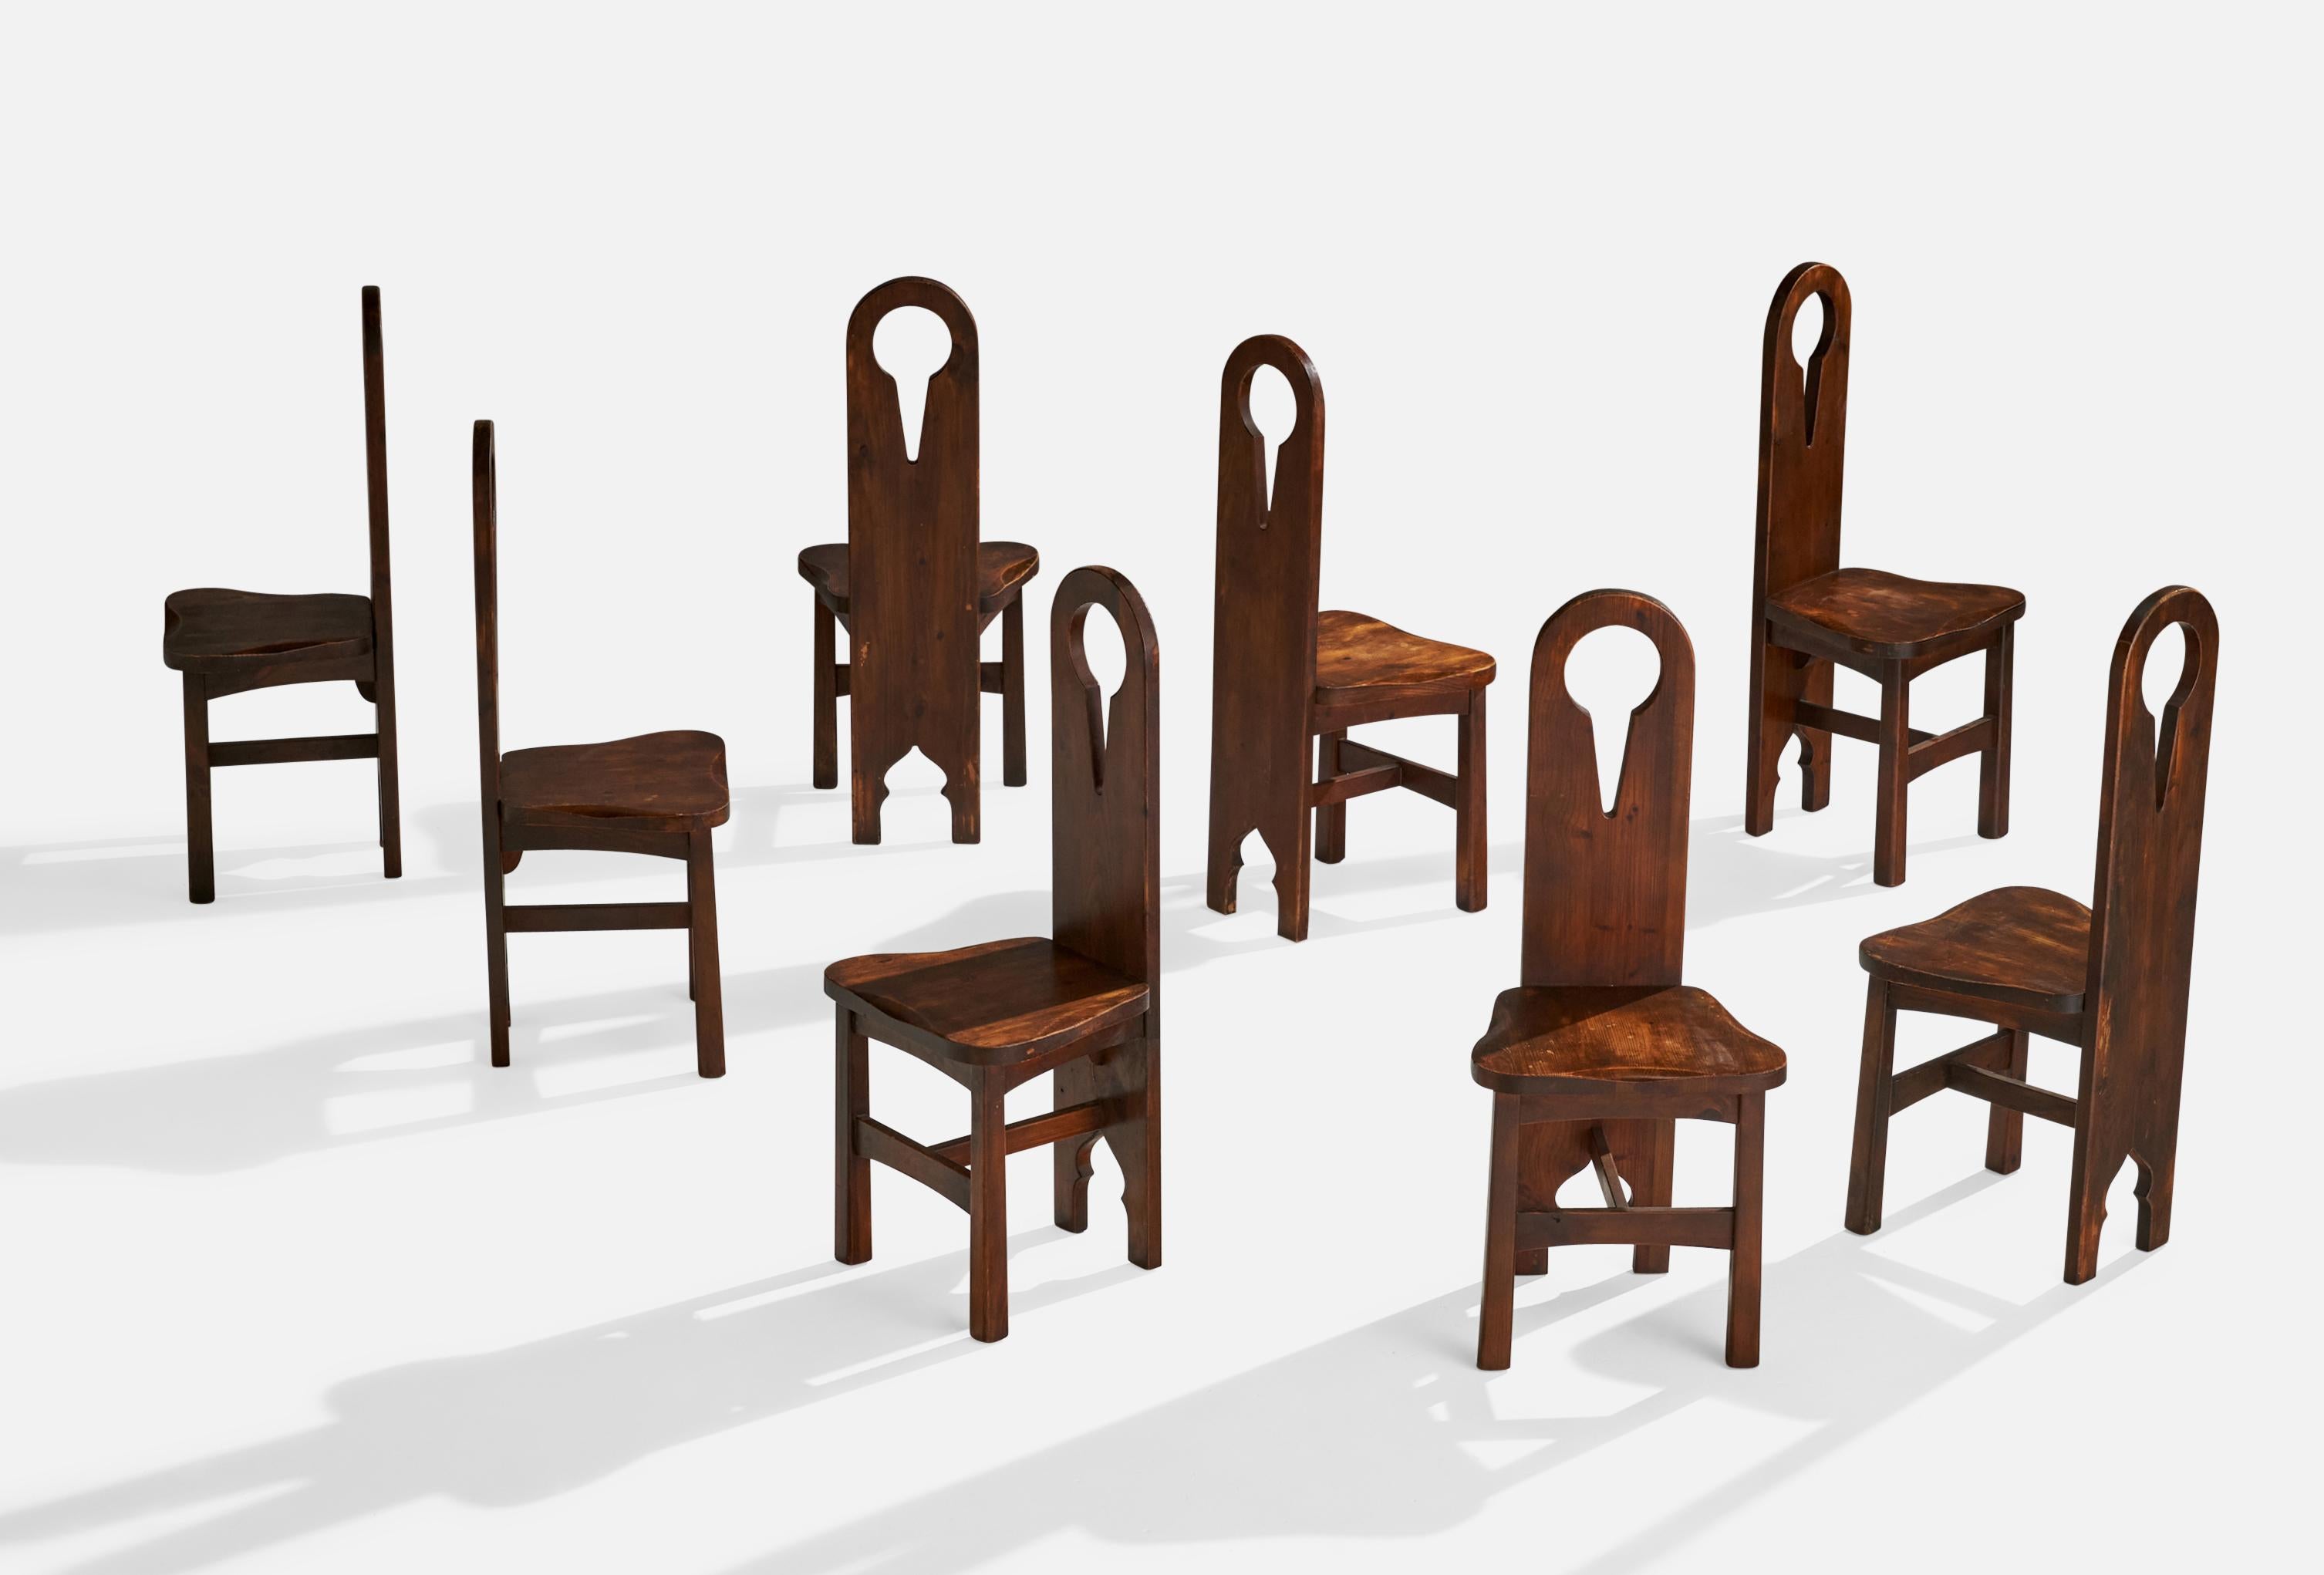 A set of 8 stained pine dining chairs designed and produced in the US, c. 1910s.

seat height 17.75” 